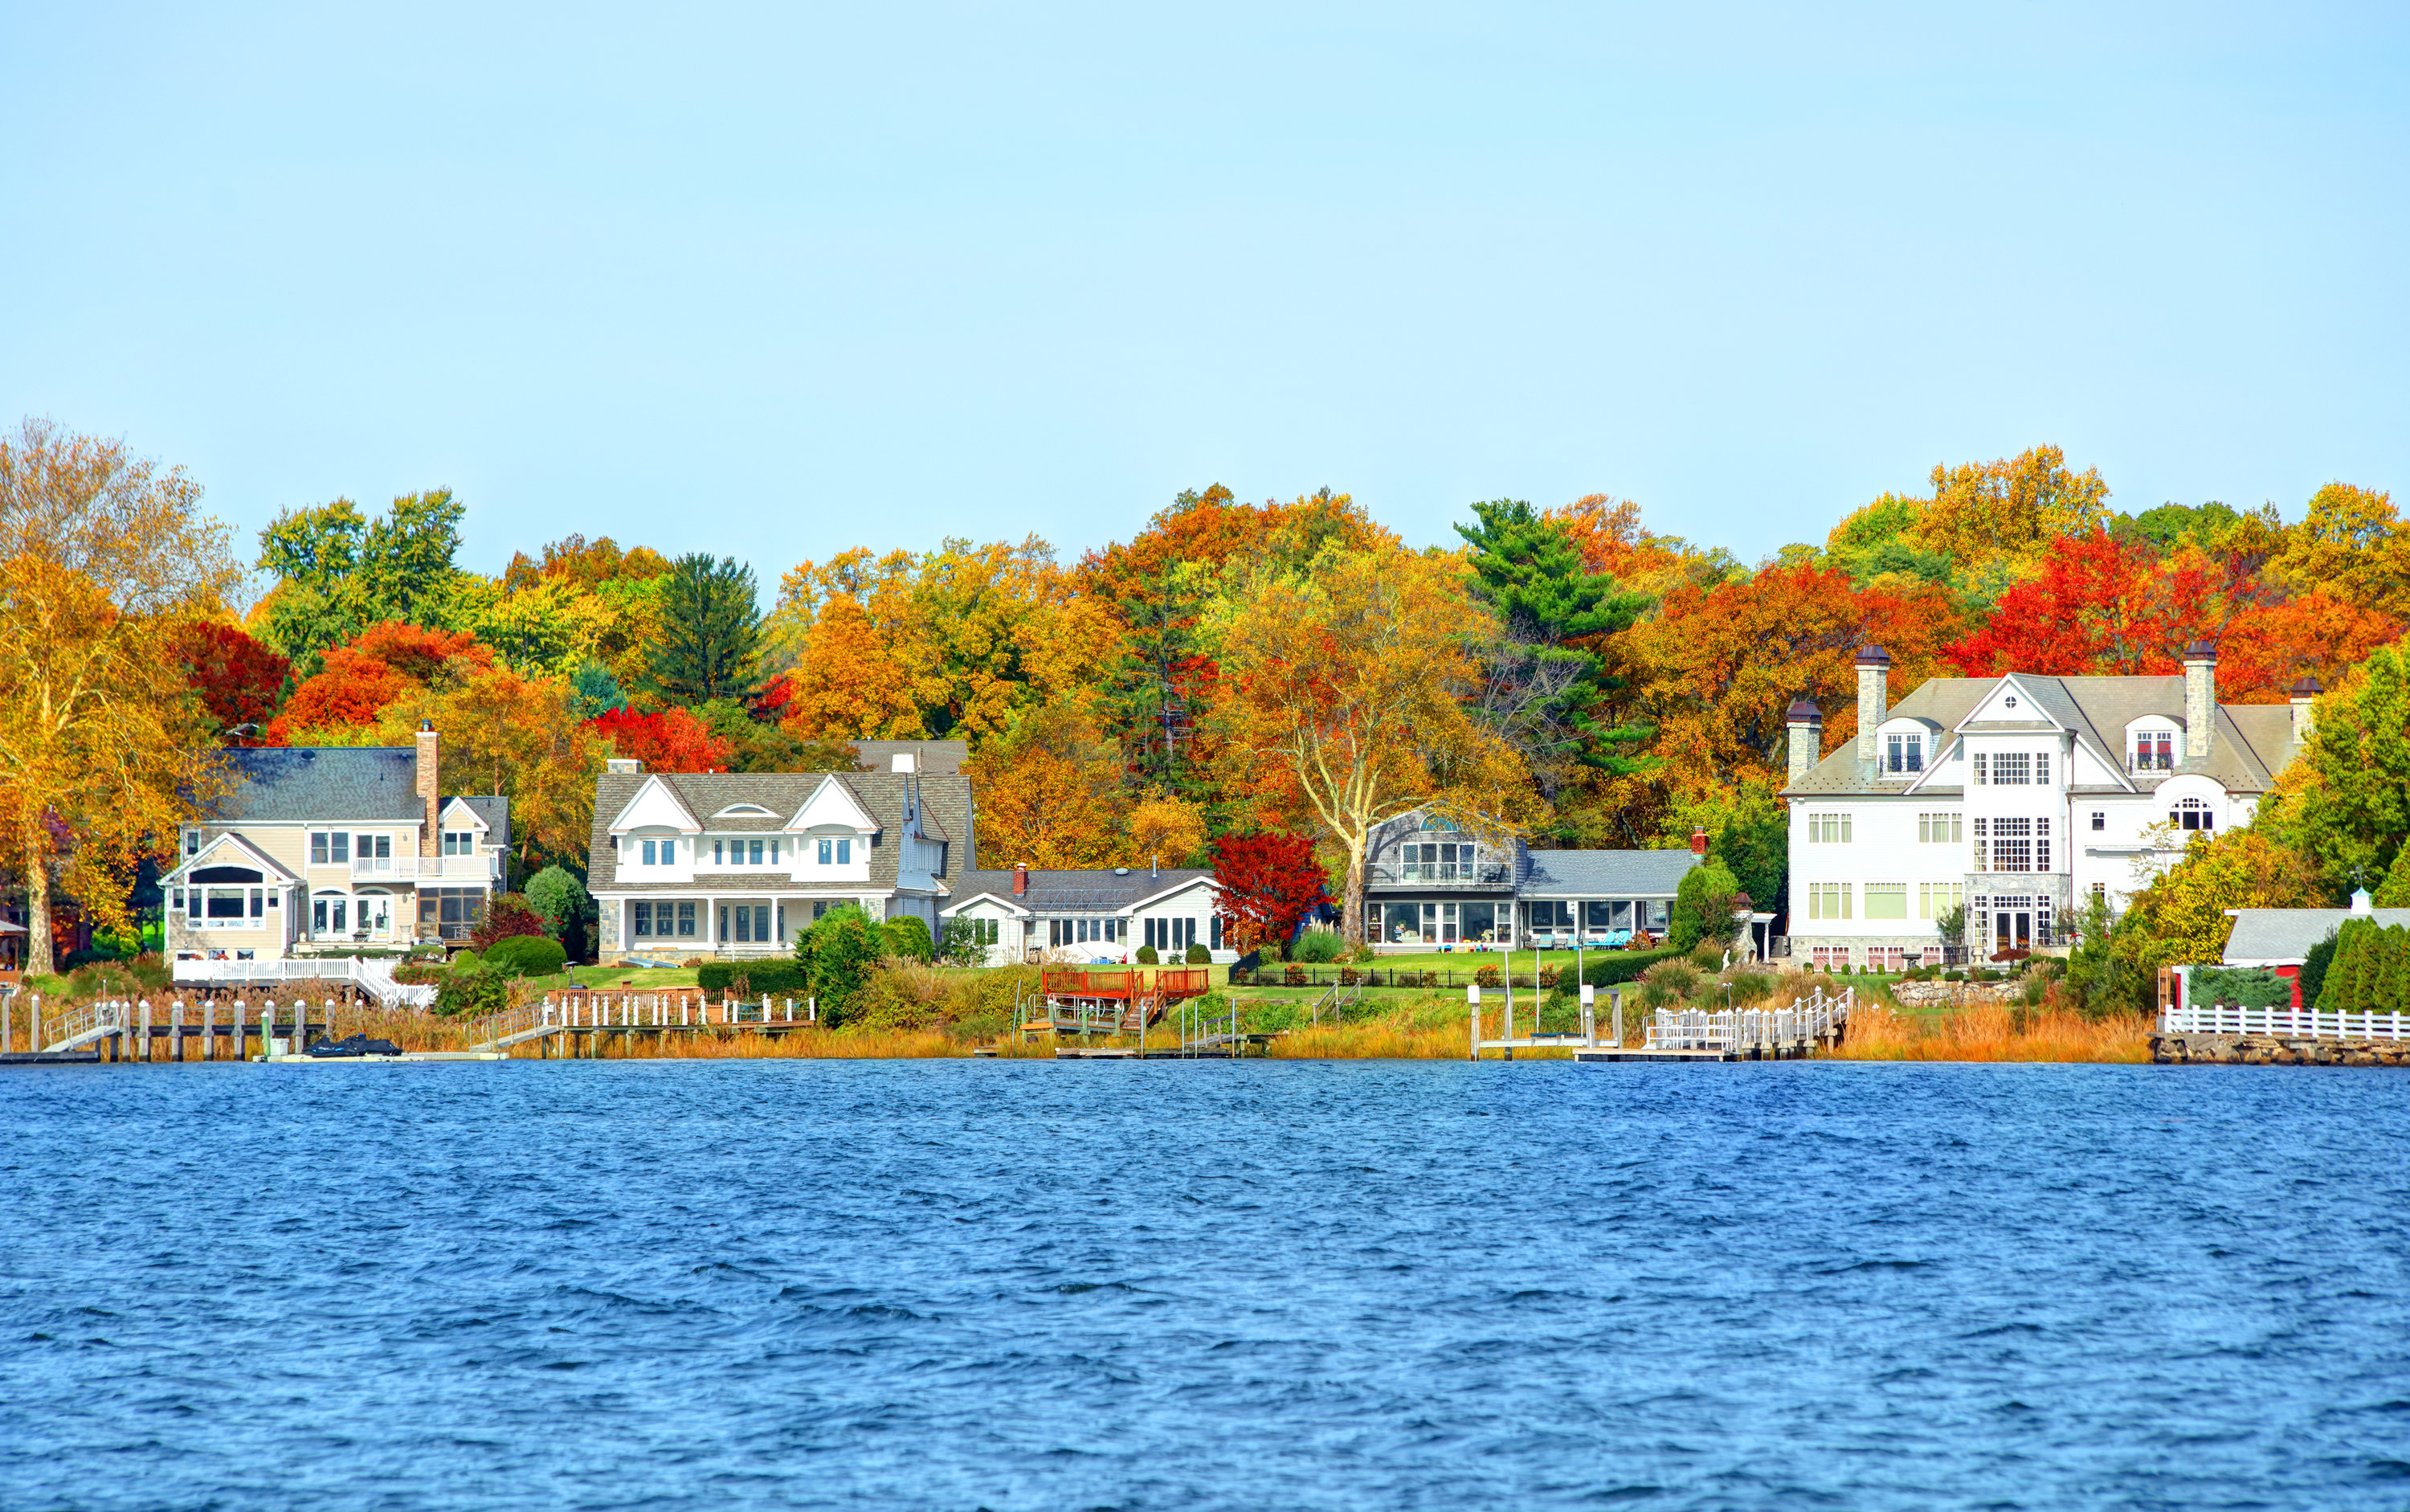 Houses along the Navesink River in Red Bank, New Jersey